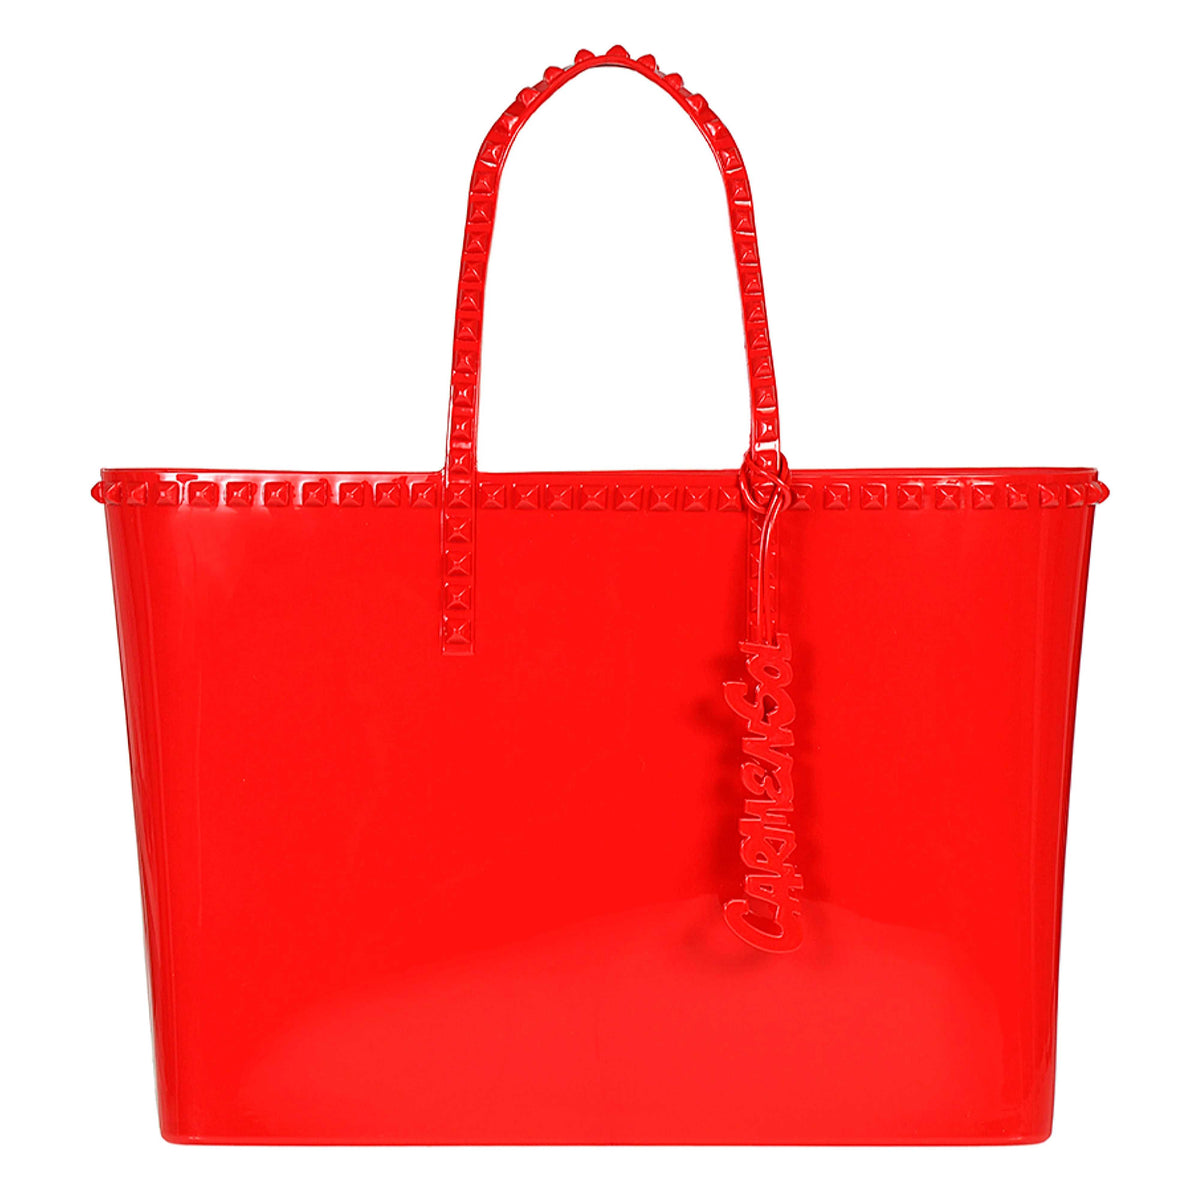 Studded womens jelly bag in red